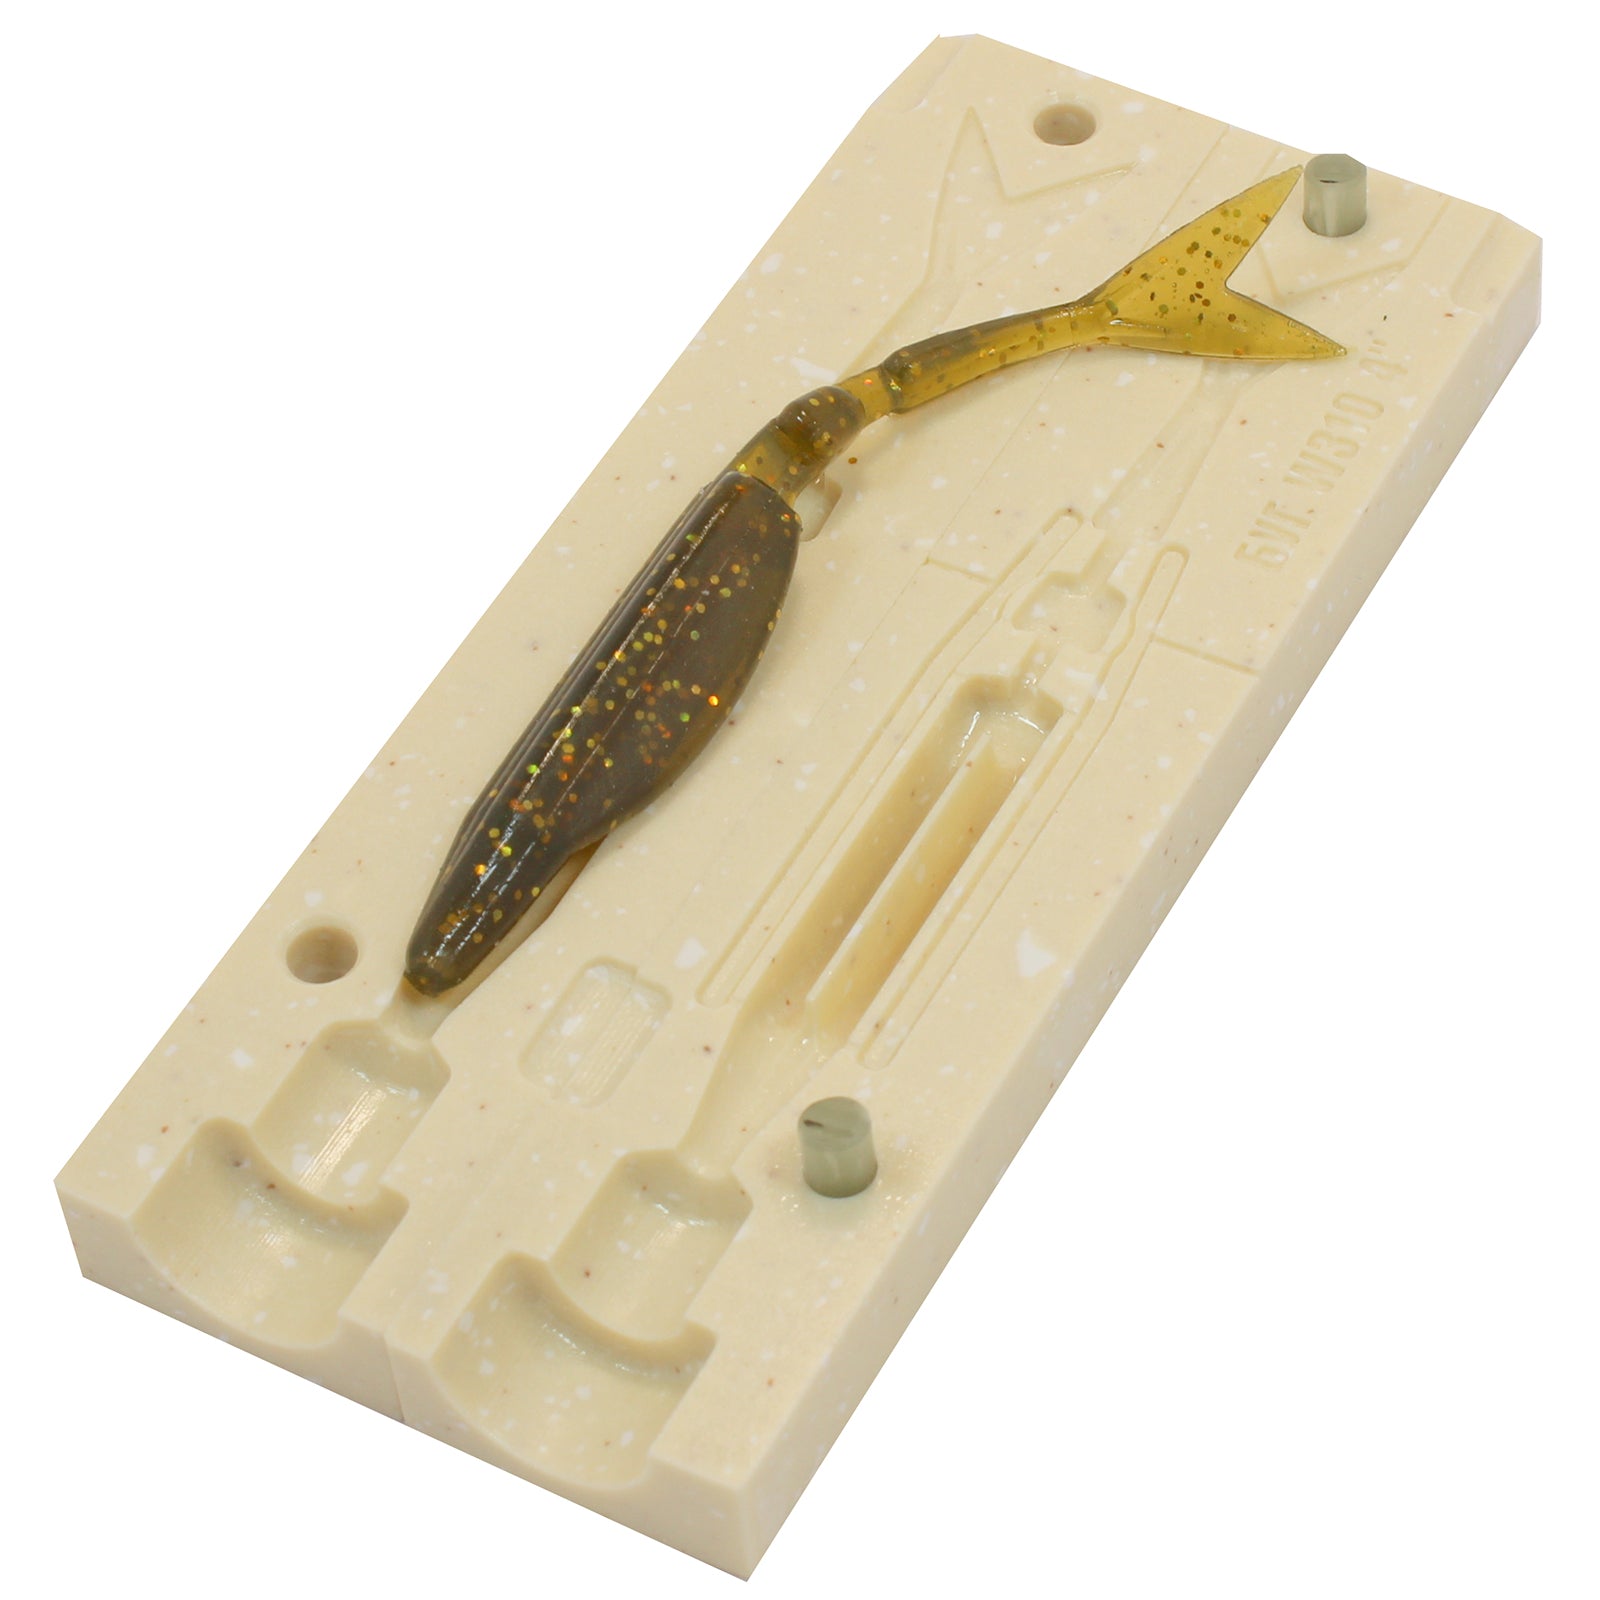 Our high quality stone mold to make your favorite soft lures